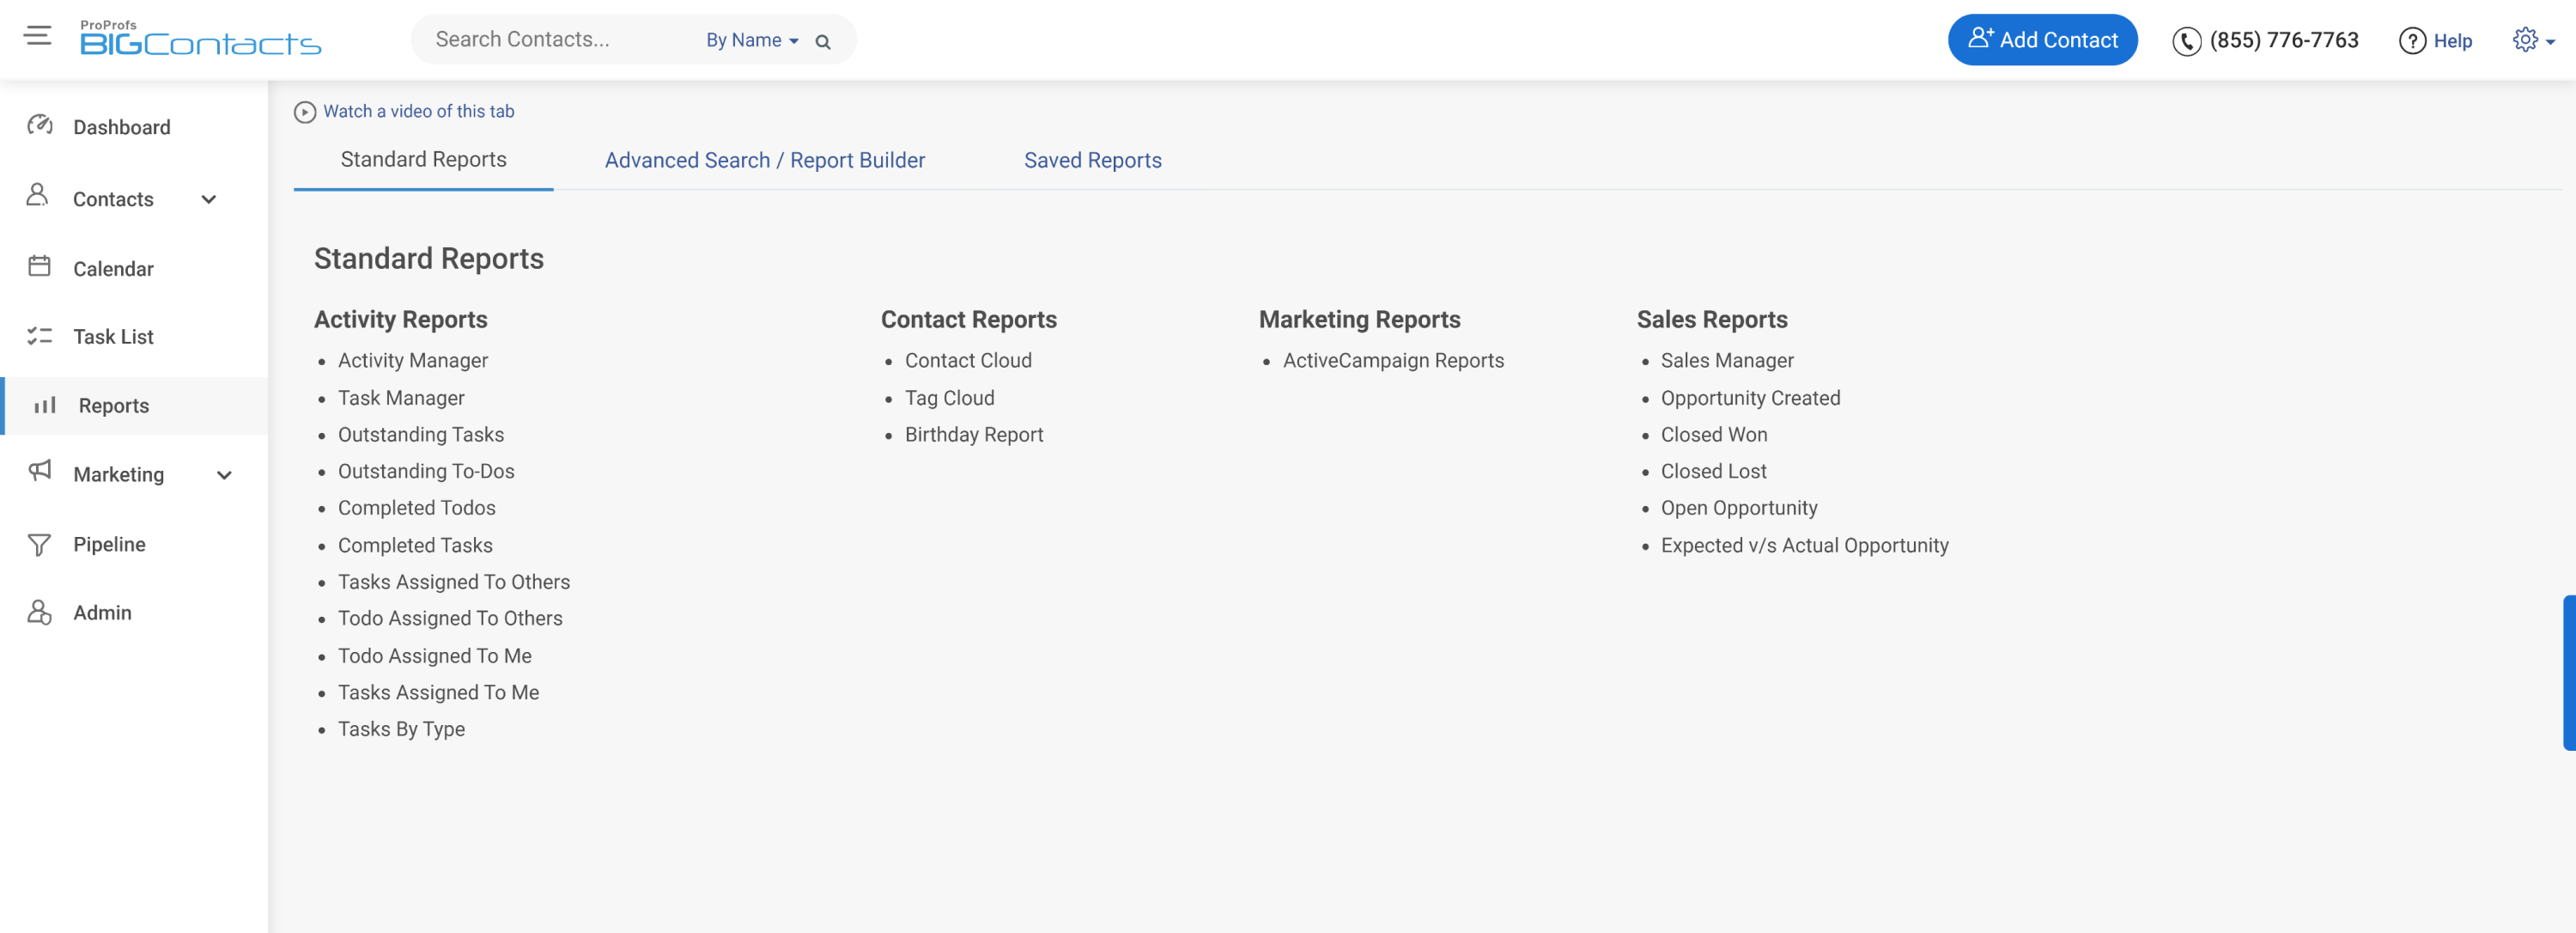 crm reports